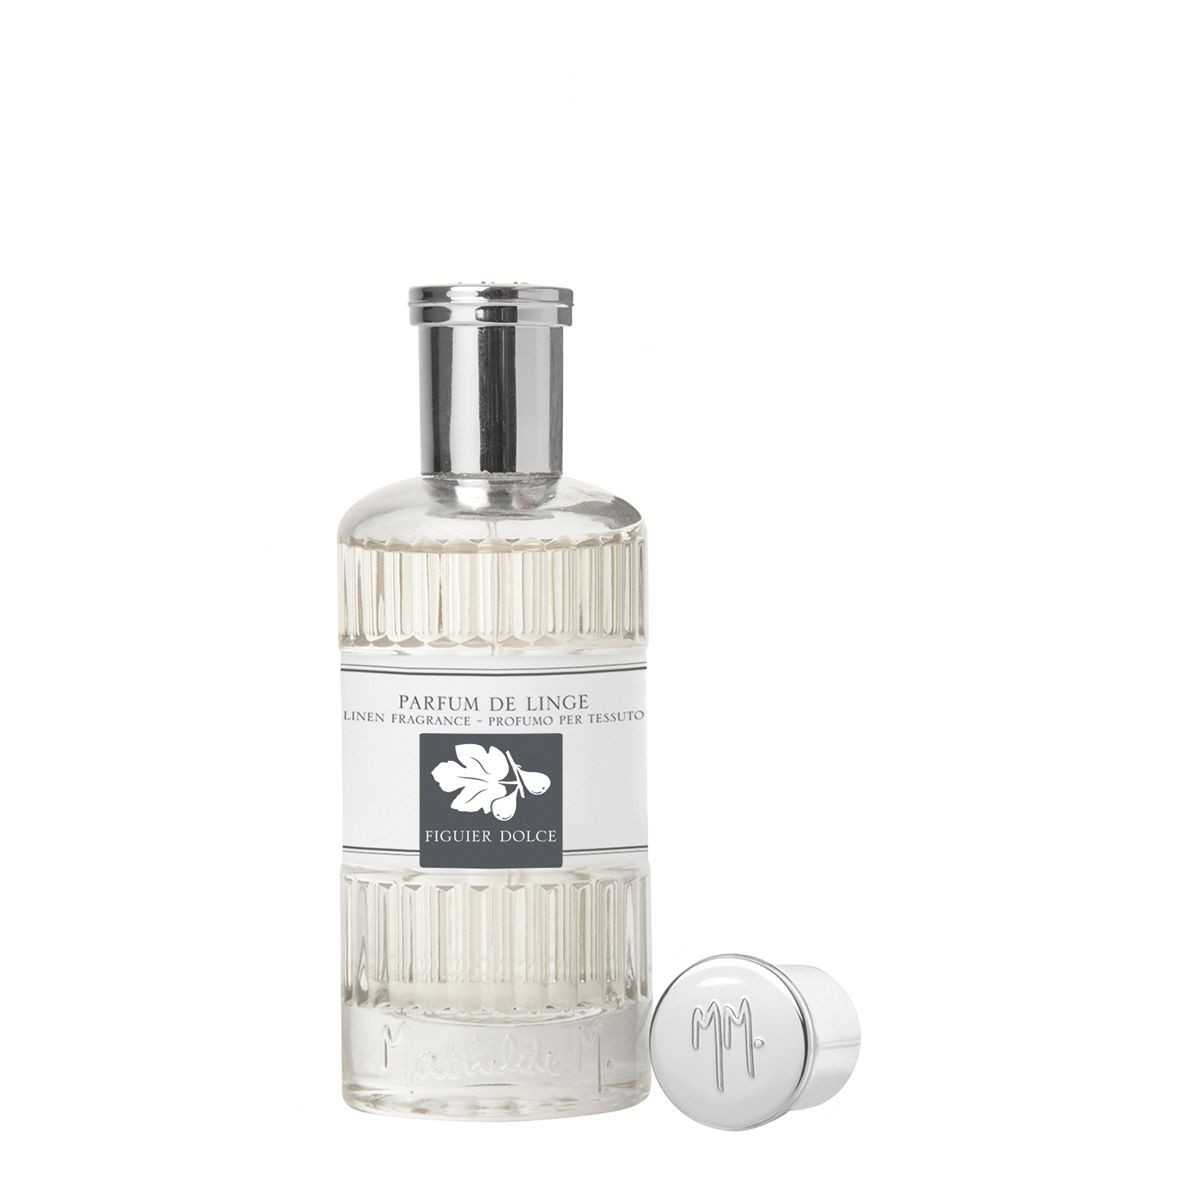 Linen perfume 75 ml - Dolce fig tree